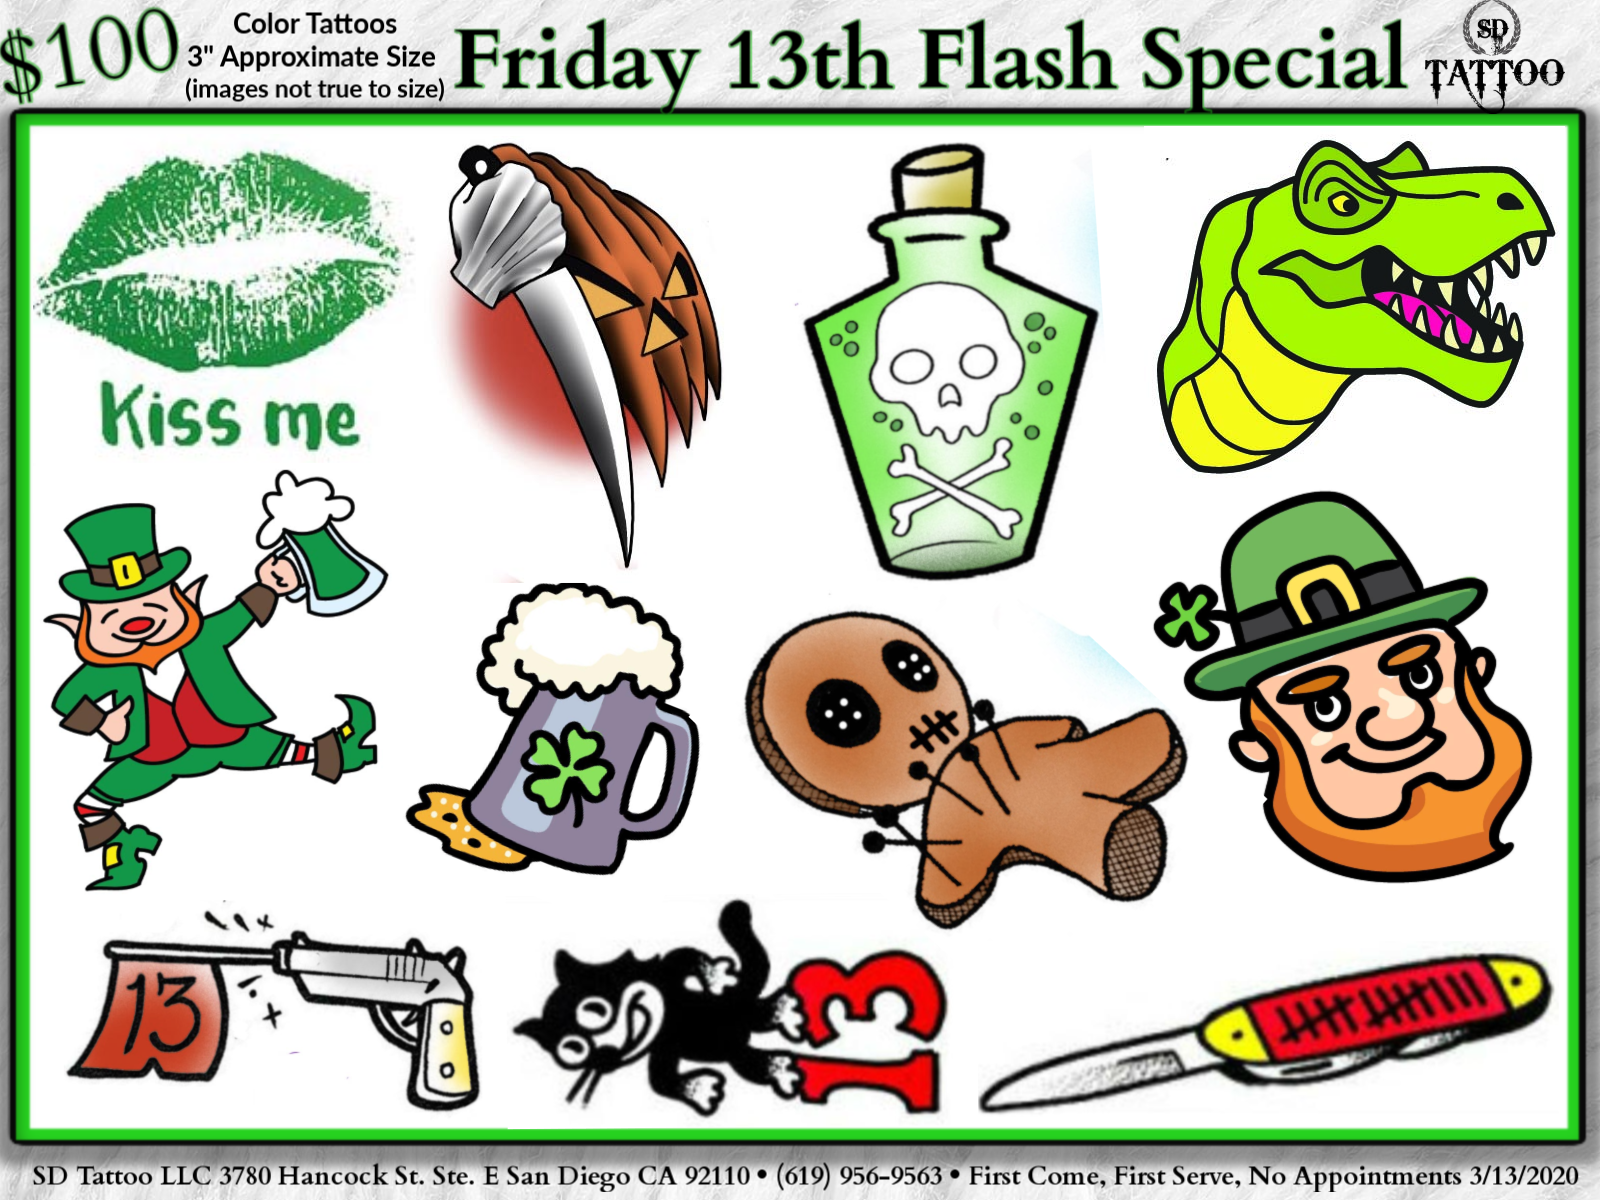 San Diego tattoo artists pull back from Friday the 13th specials  San Diego  Reader